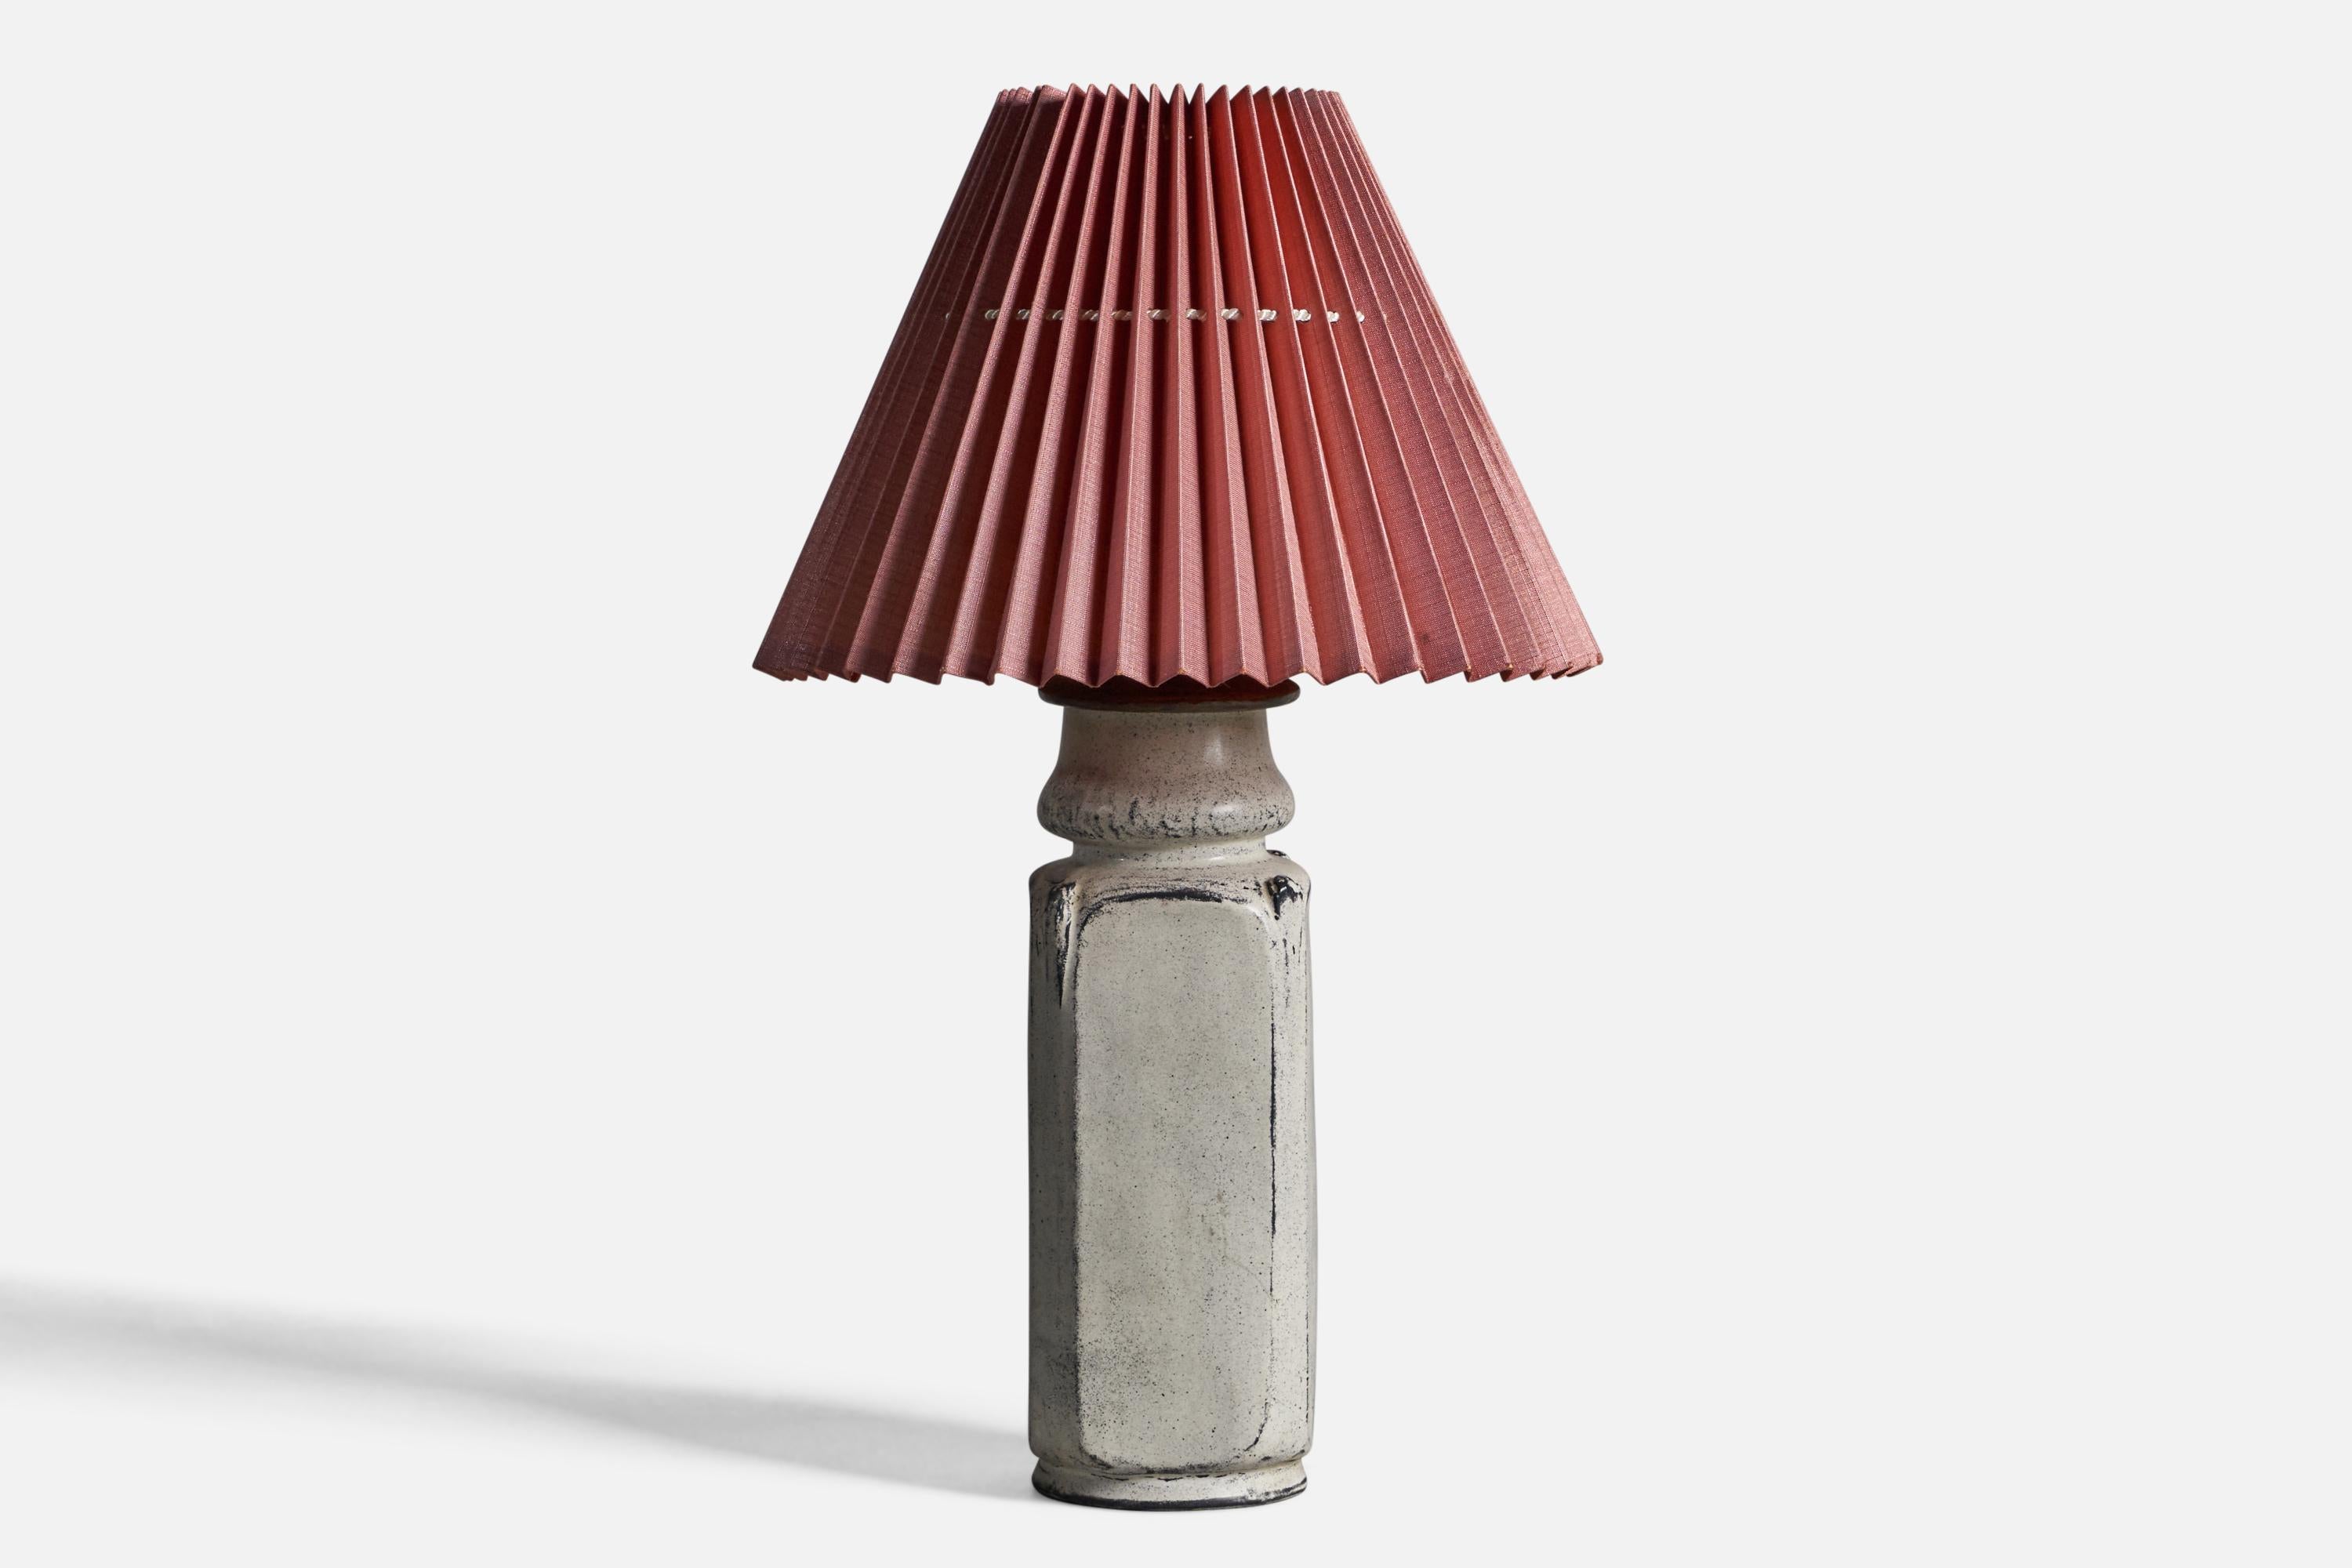 A grey-glazed earthenware and red paper table lamp, designed by Svend Hammershøi and produced by Kähler, Denmark, c. 1930s

Overall Dimensions (inches): 18.25